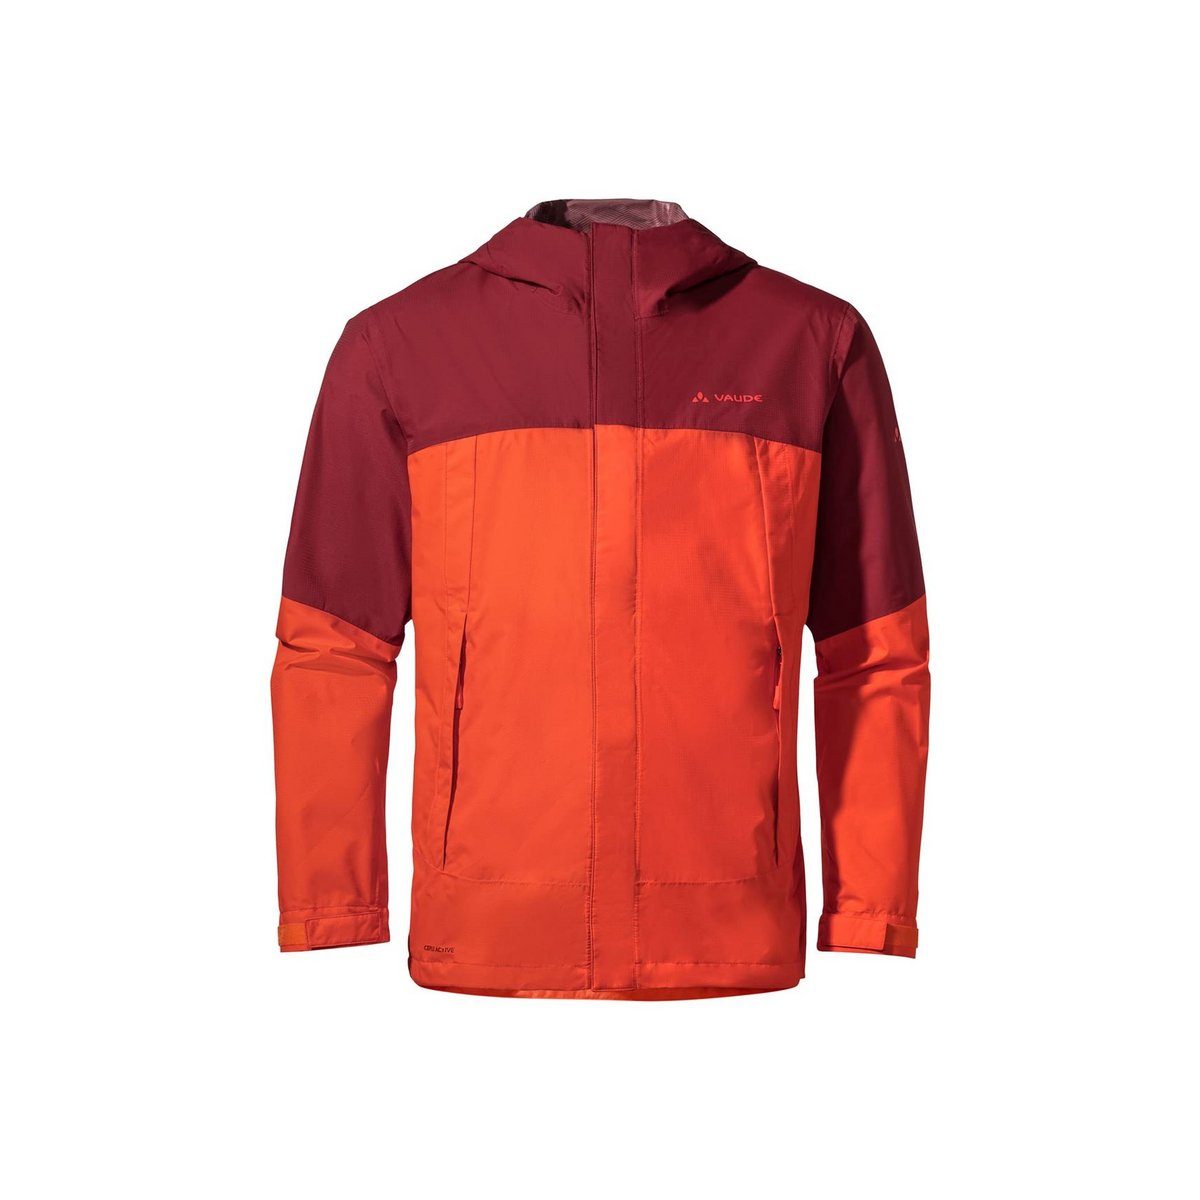 red Funktionsjacke VAUDE rot glowing sonstiges (1-St)